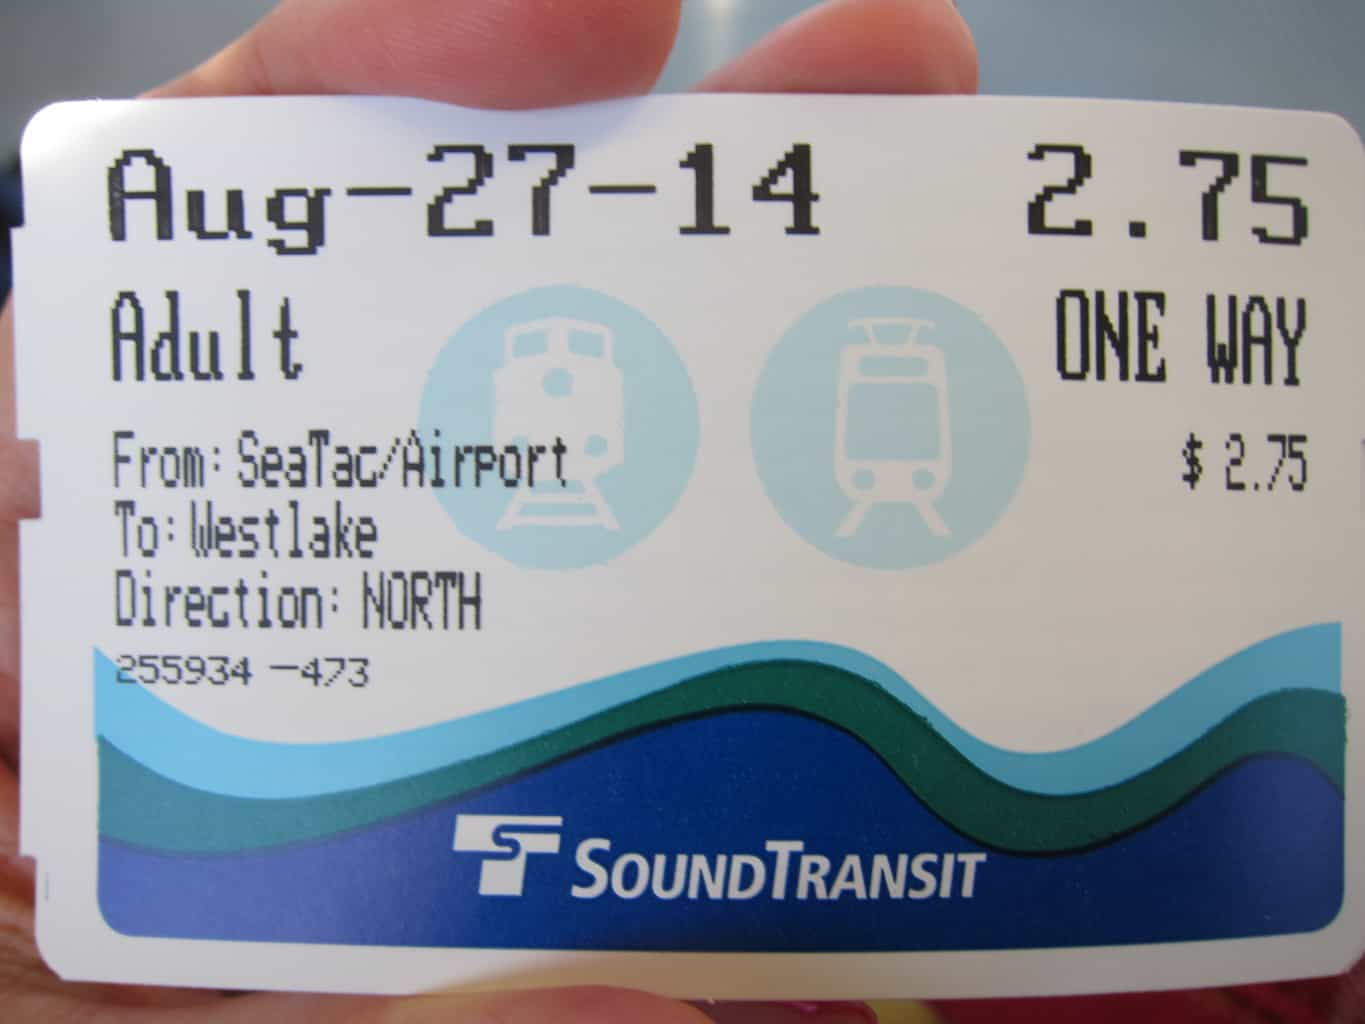 On our recent trip to Seattle, we took the light rail from SeaTac Airport to downtown Seattle. Compared to a taxi ride (which normally costs about USD$40-50). the ride only costs us USD$2.75 per person. Isn't that super economical? 